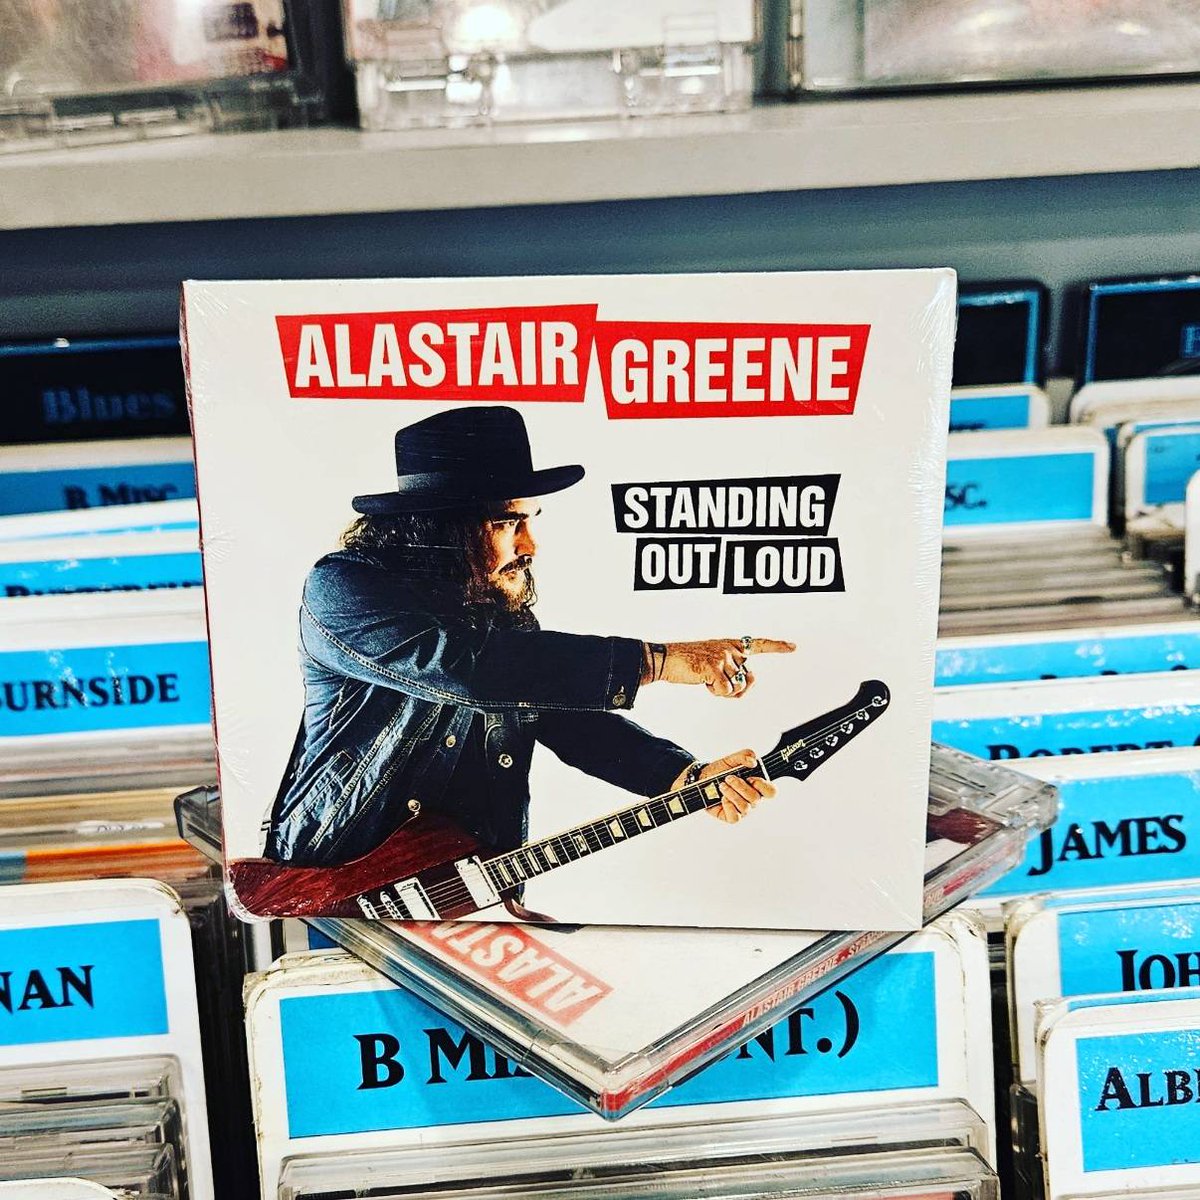 Guitar virtuoso @AlastairGreene's new album features rowdy, rollicking tracks rooted in the tradition of '60s and '70s blues rock. 'Standing Out Loud' is out now on CD and vinyl via @RufRecords. Get it here: bit.ly/4bgOrgl